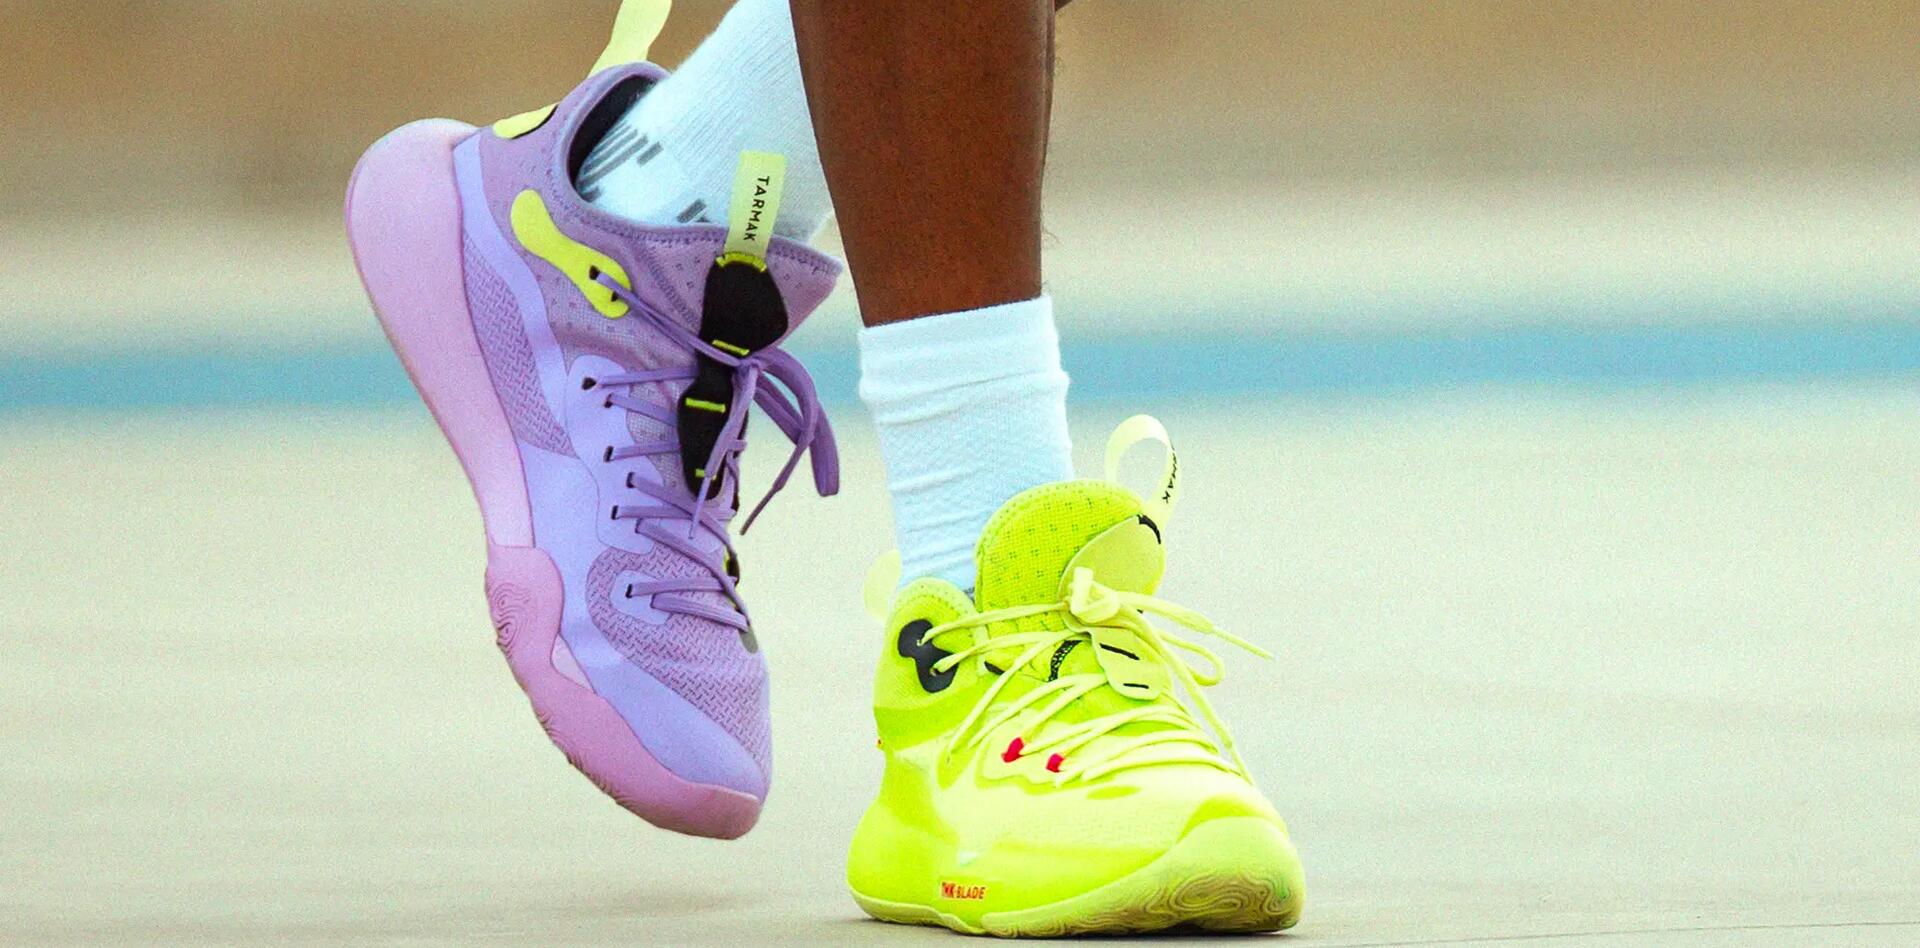 A close up purple and yellow basketball shoes